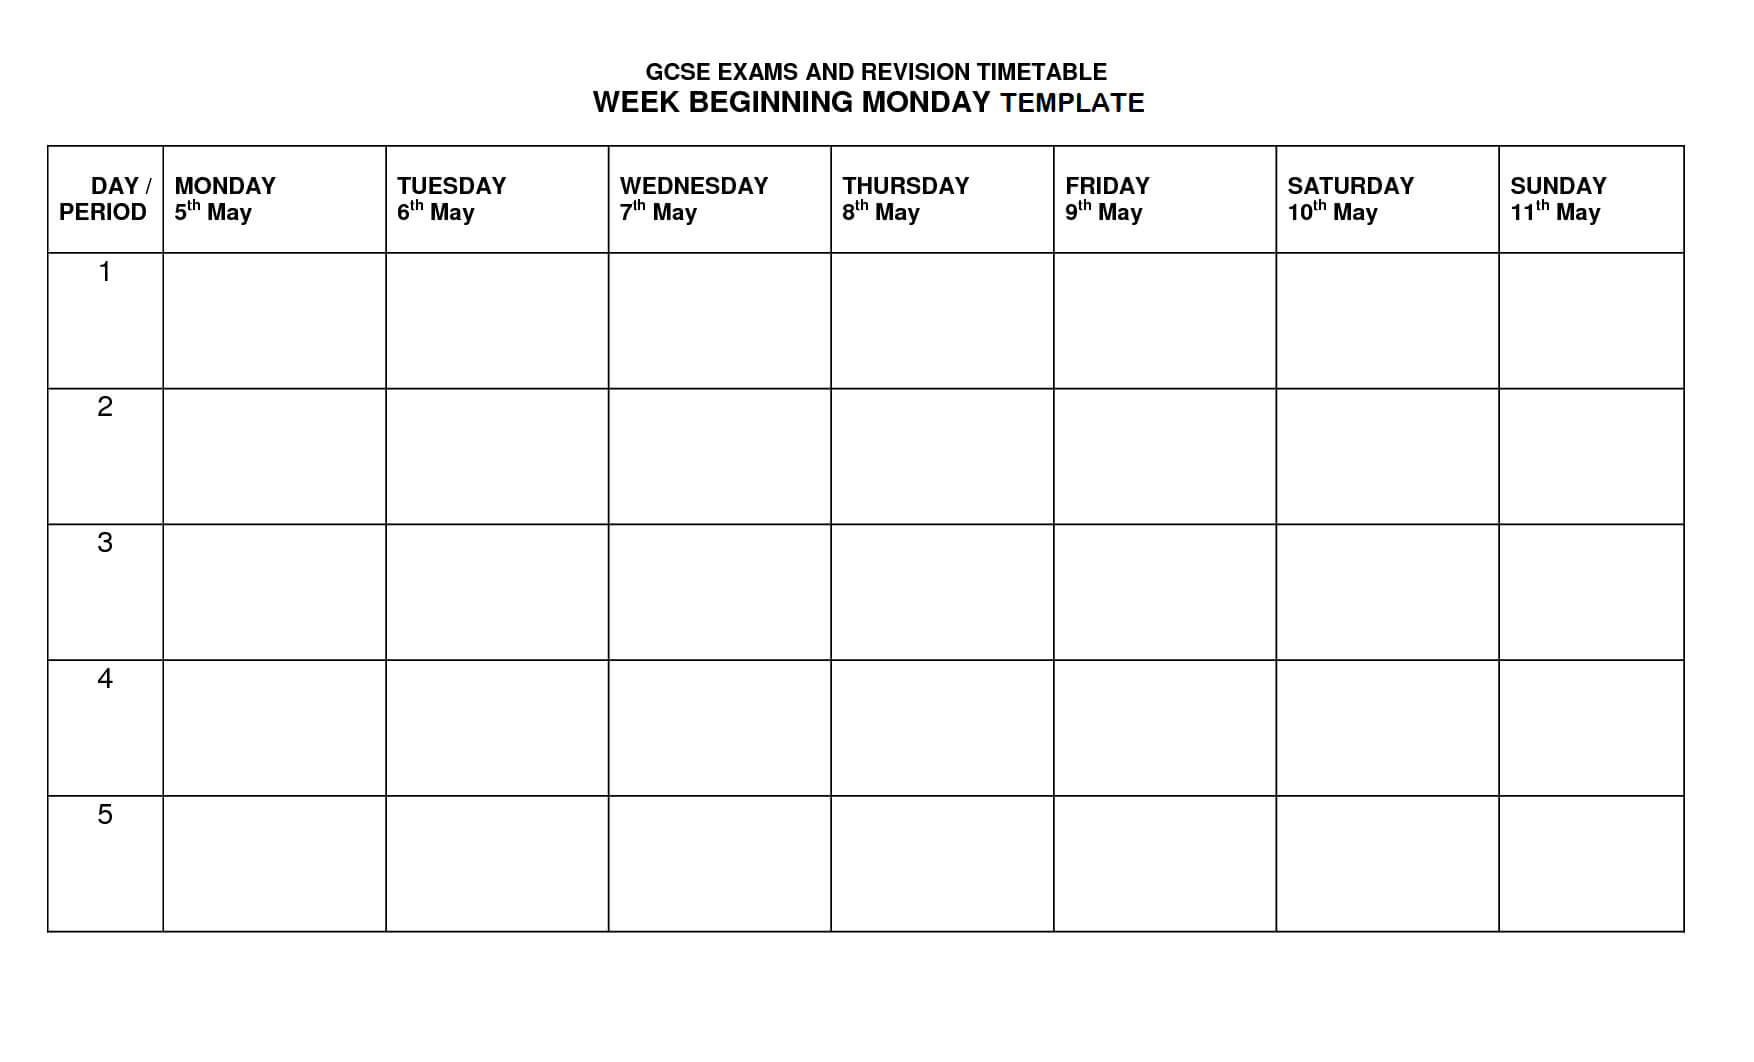 Timetable Template | Revision Timetable Template, Revision Regarding Blank Revision Timetable Template